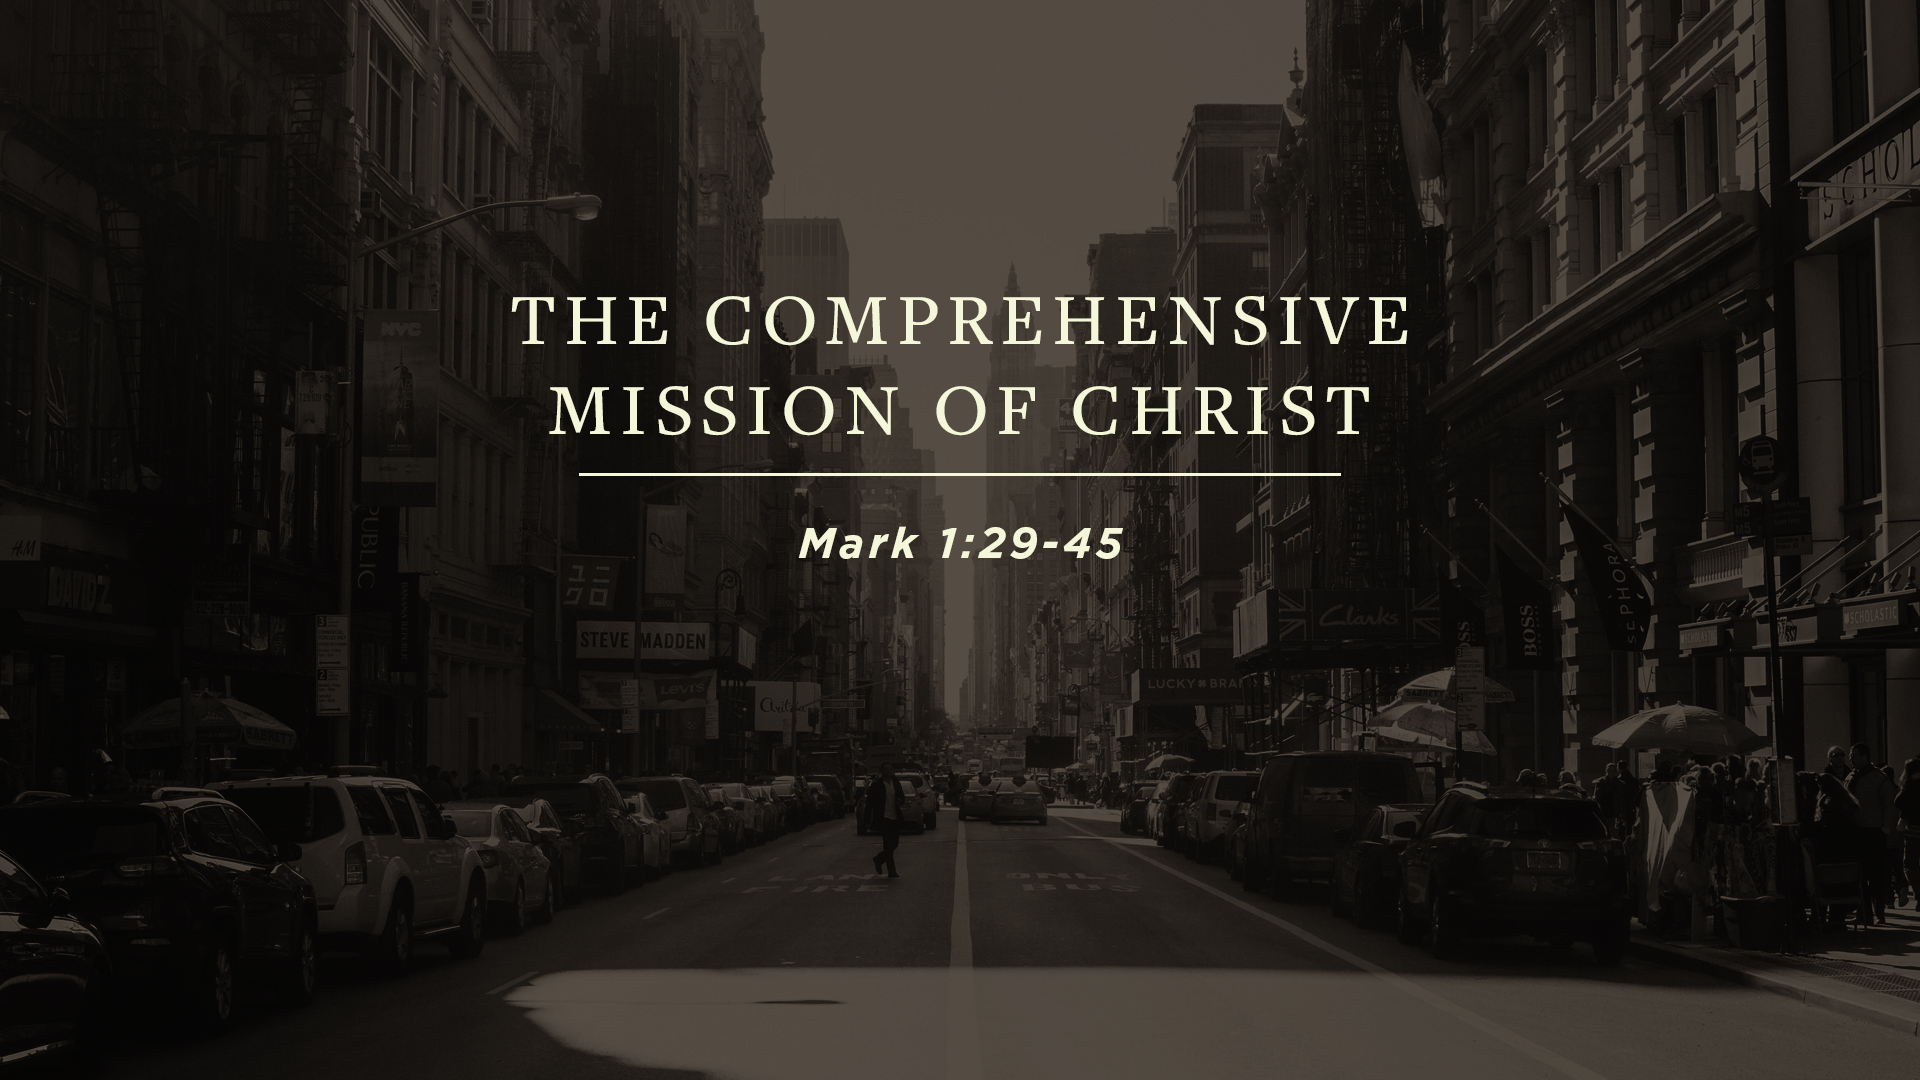 The Comprehensive Mission of Christ